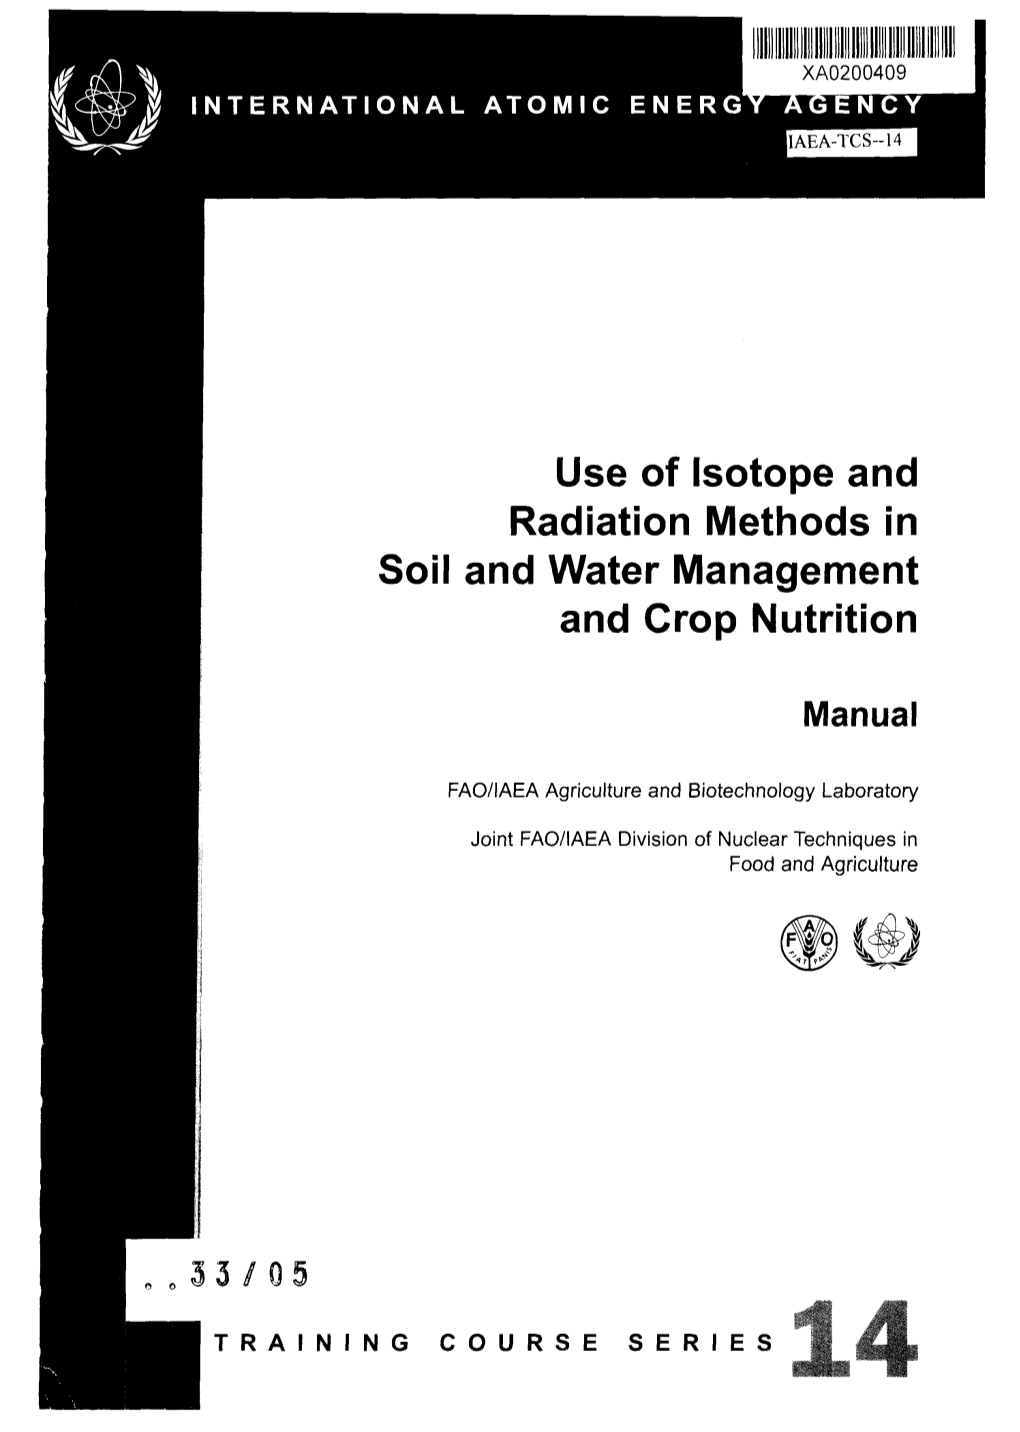 Use of Isotope and Radiation Methods in Soil and Water Management and Crop Nutrition